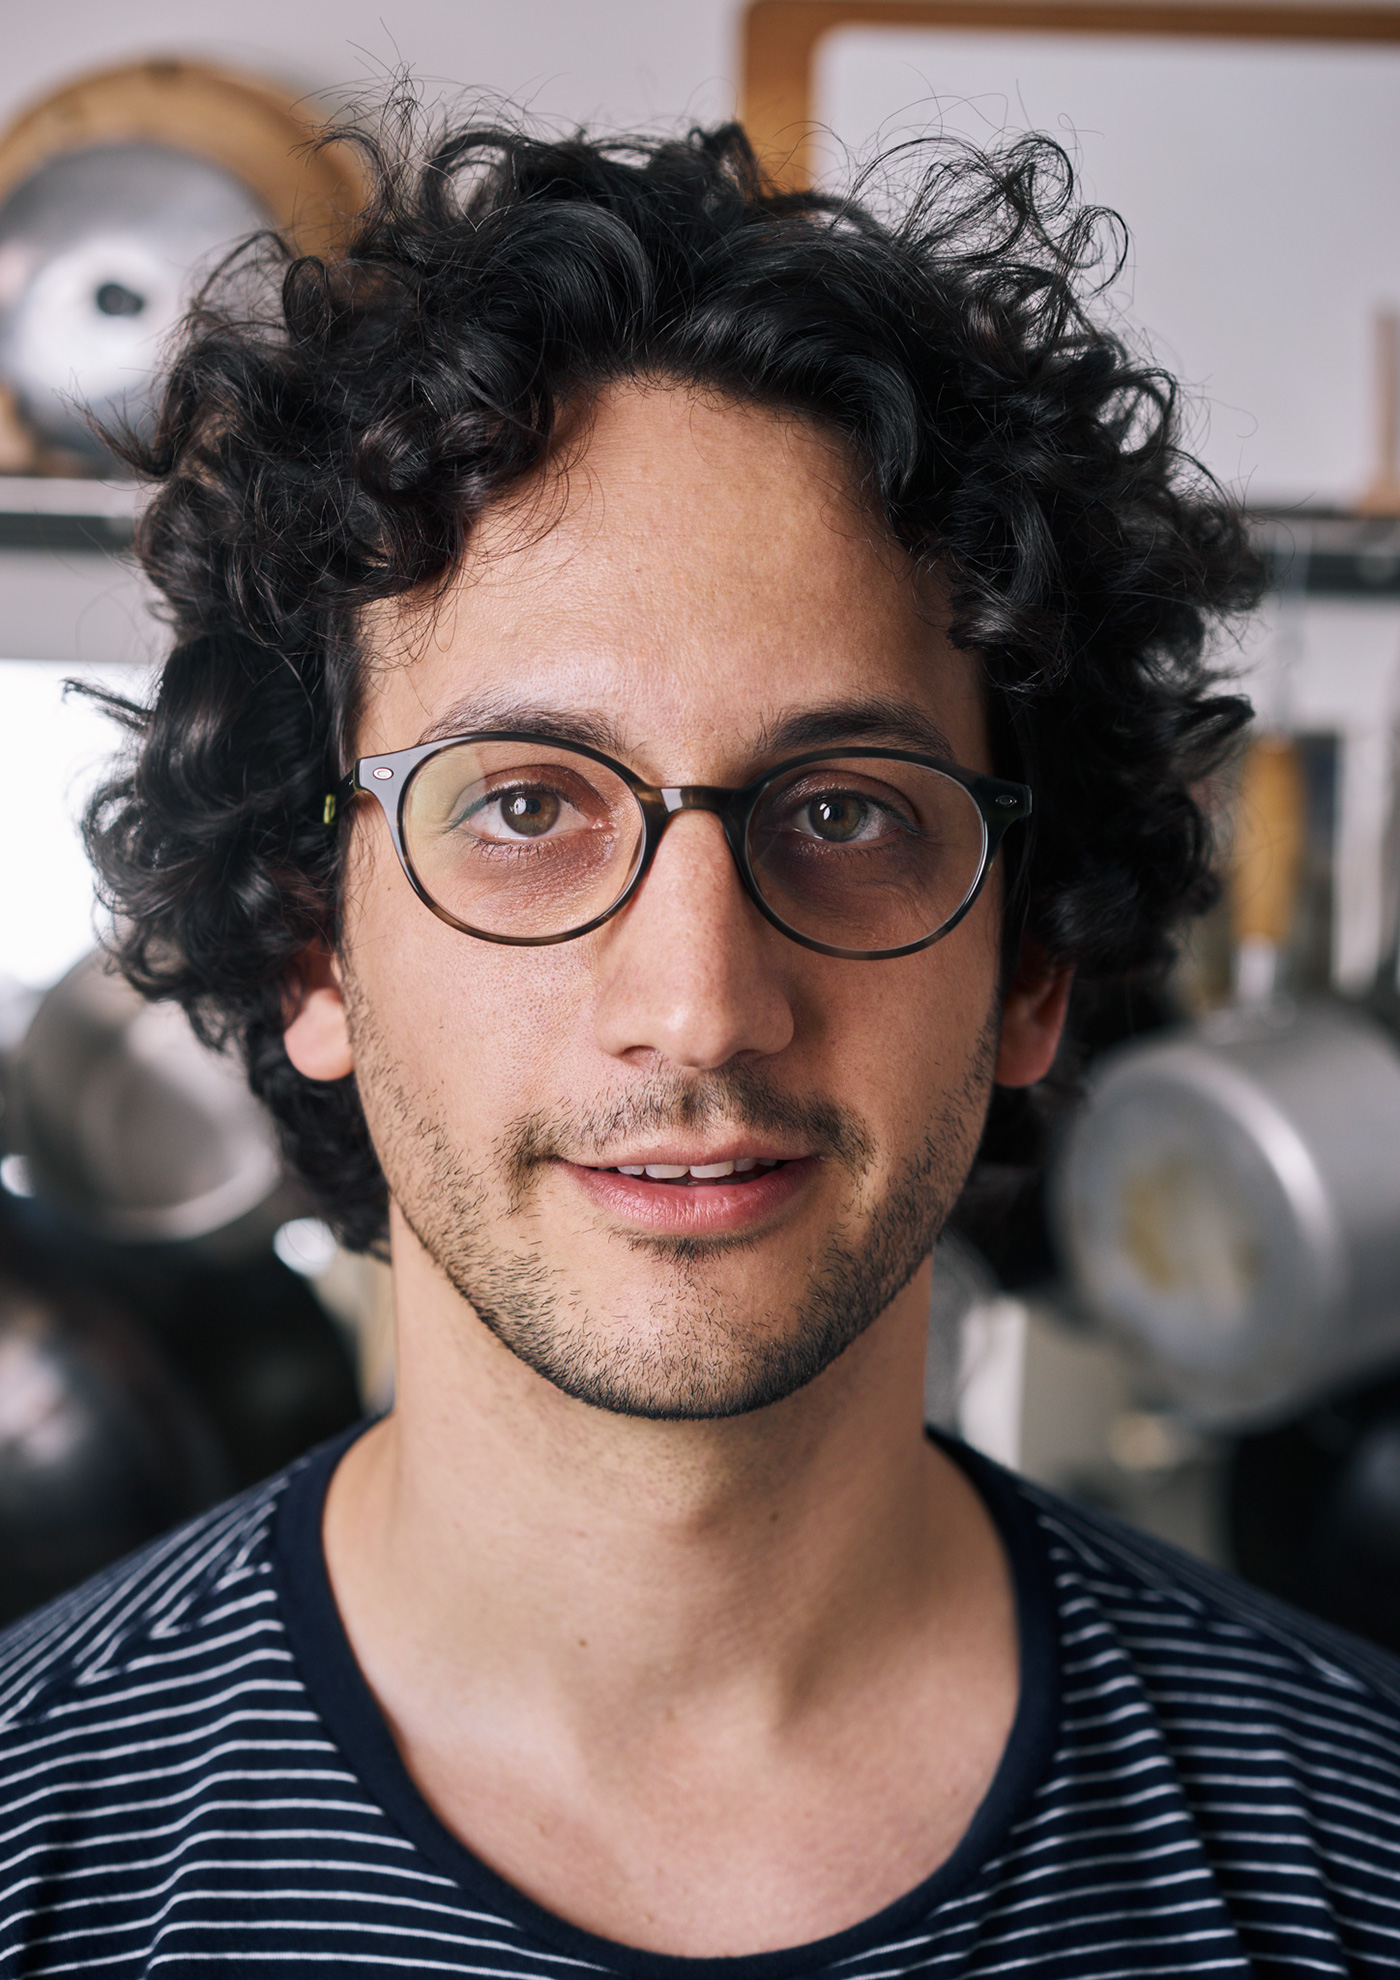 Meet Alex French Guy Cooking. 